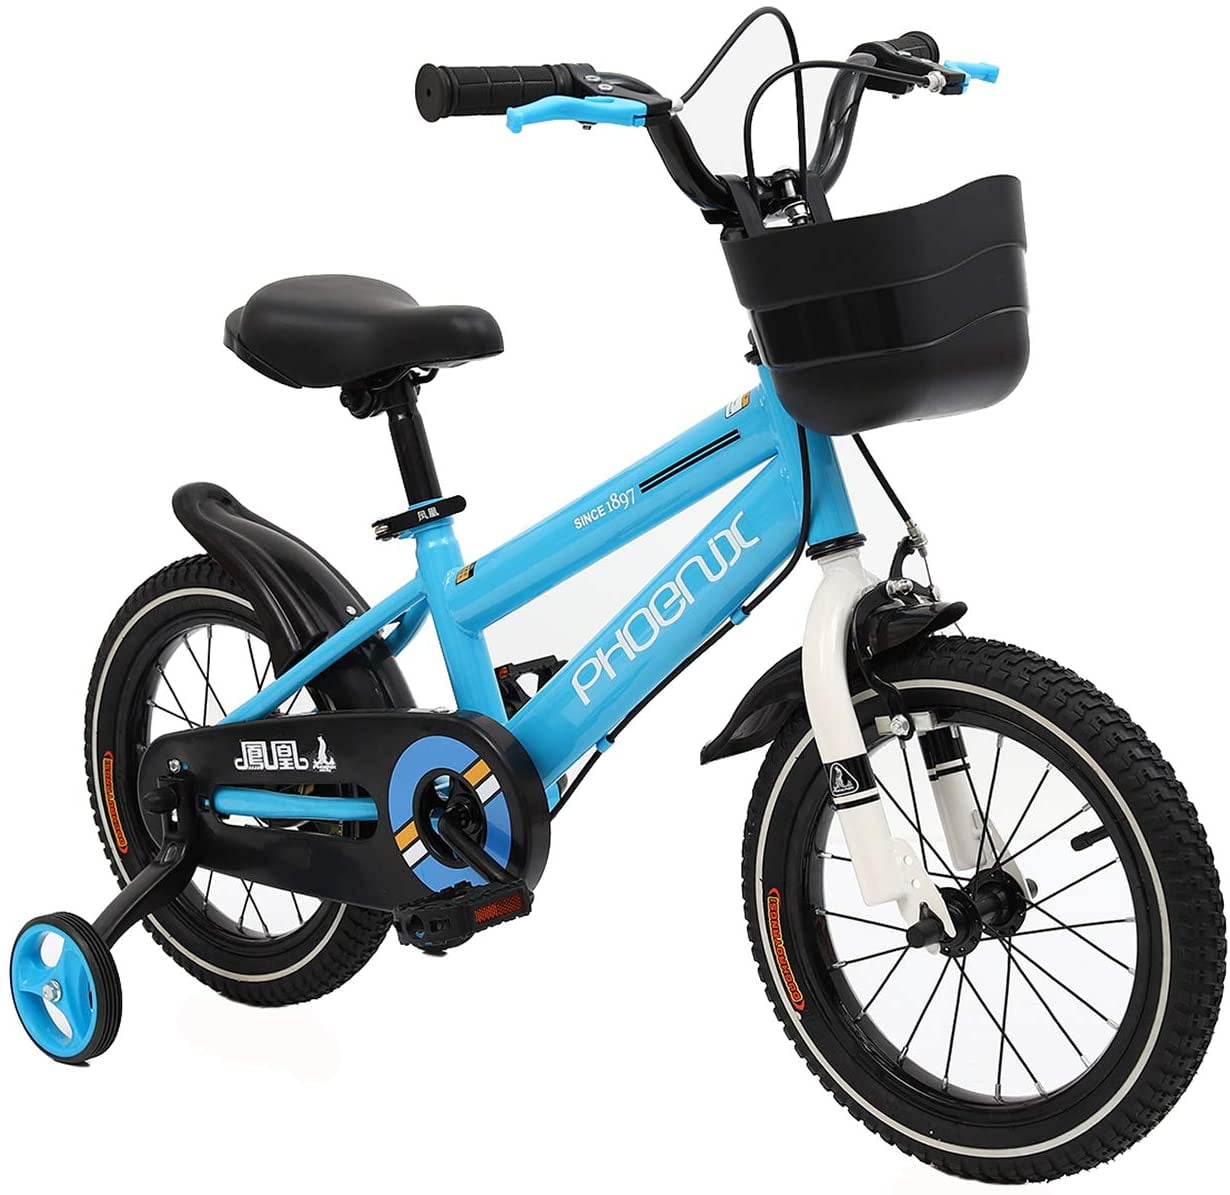 PHOENIX Kids Bike for Boys Girls Ages 4-10 Youth with 85% Assembled 18 inch with Training Wheels 